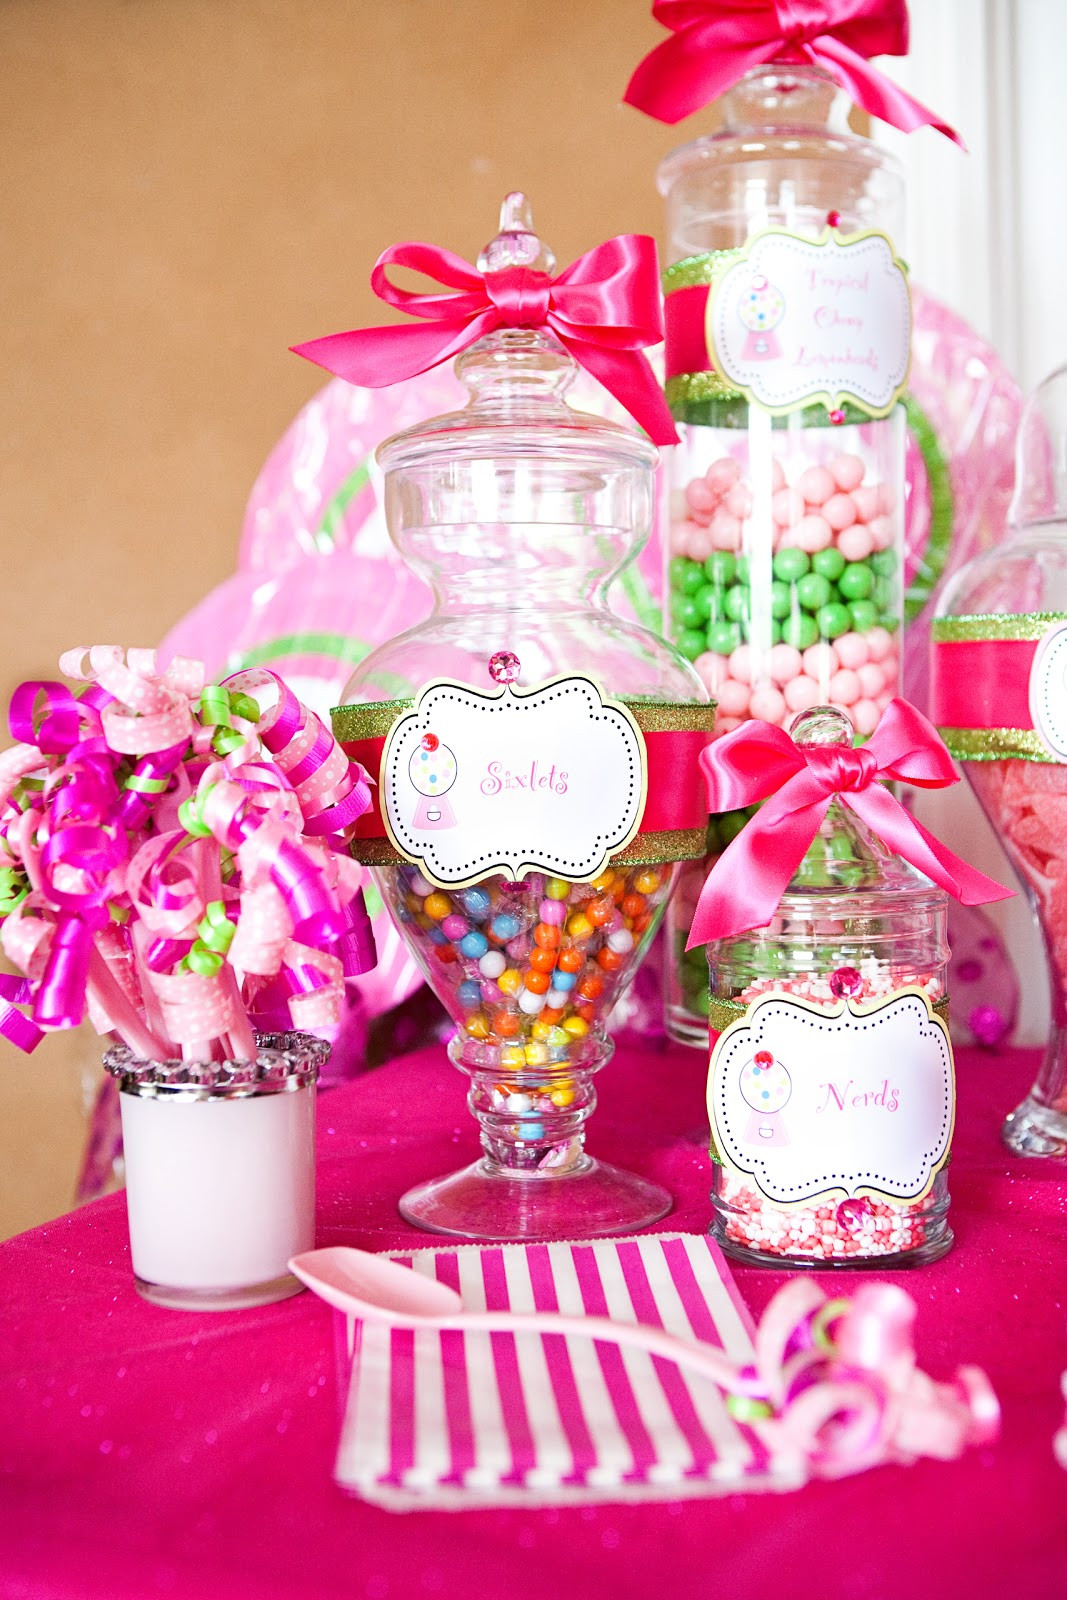 Birthday Party Ideas For Women
 The TomKat Studio Sweet Customers Pink Sweet Shoppe